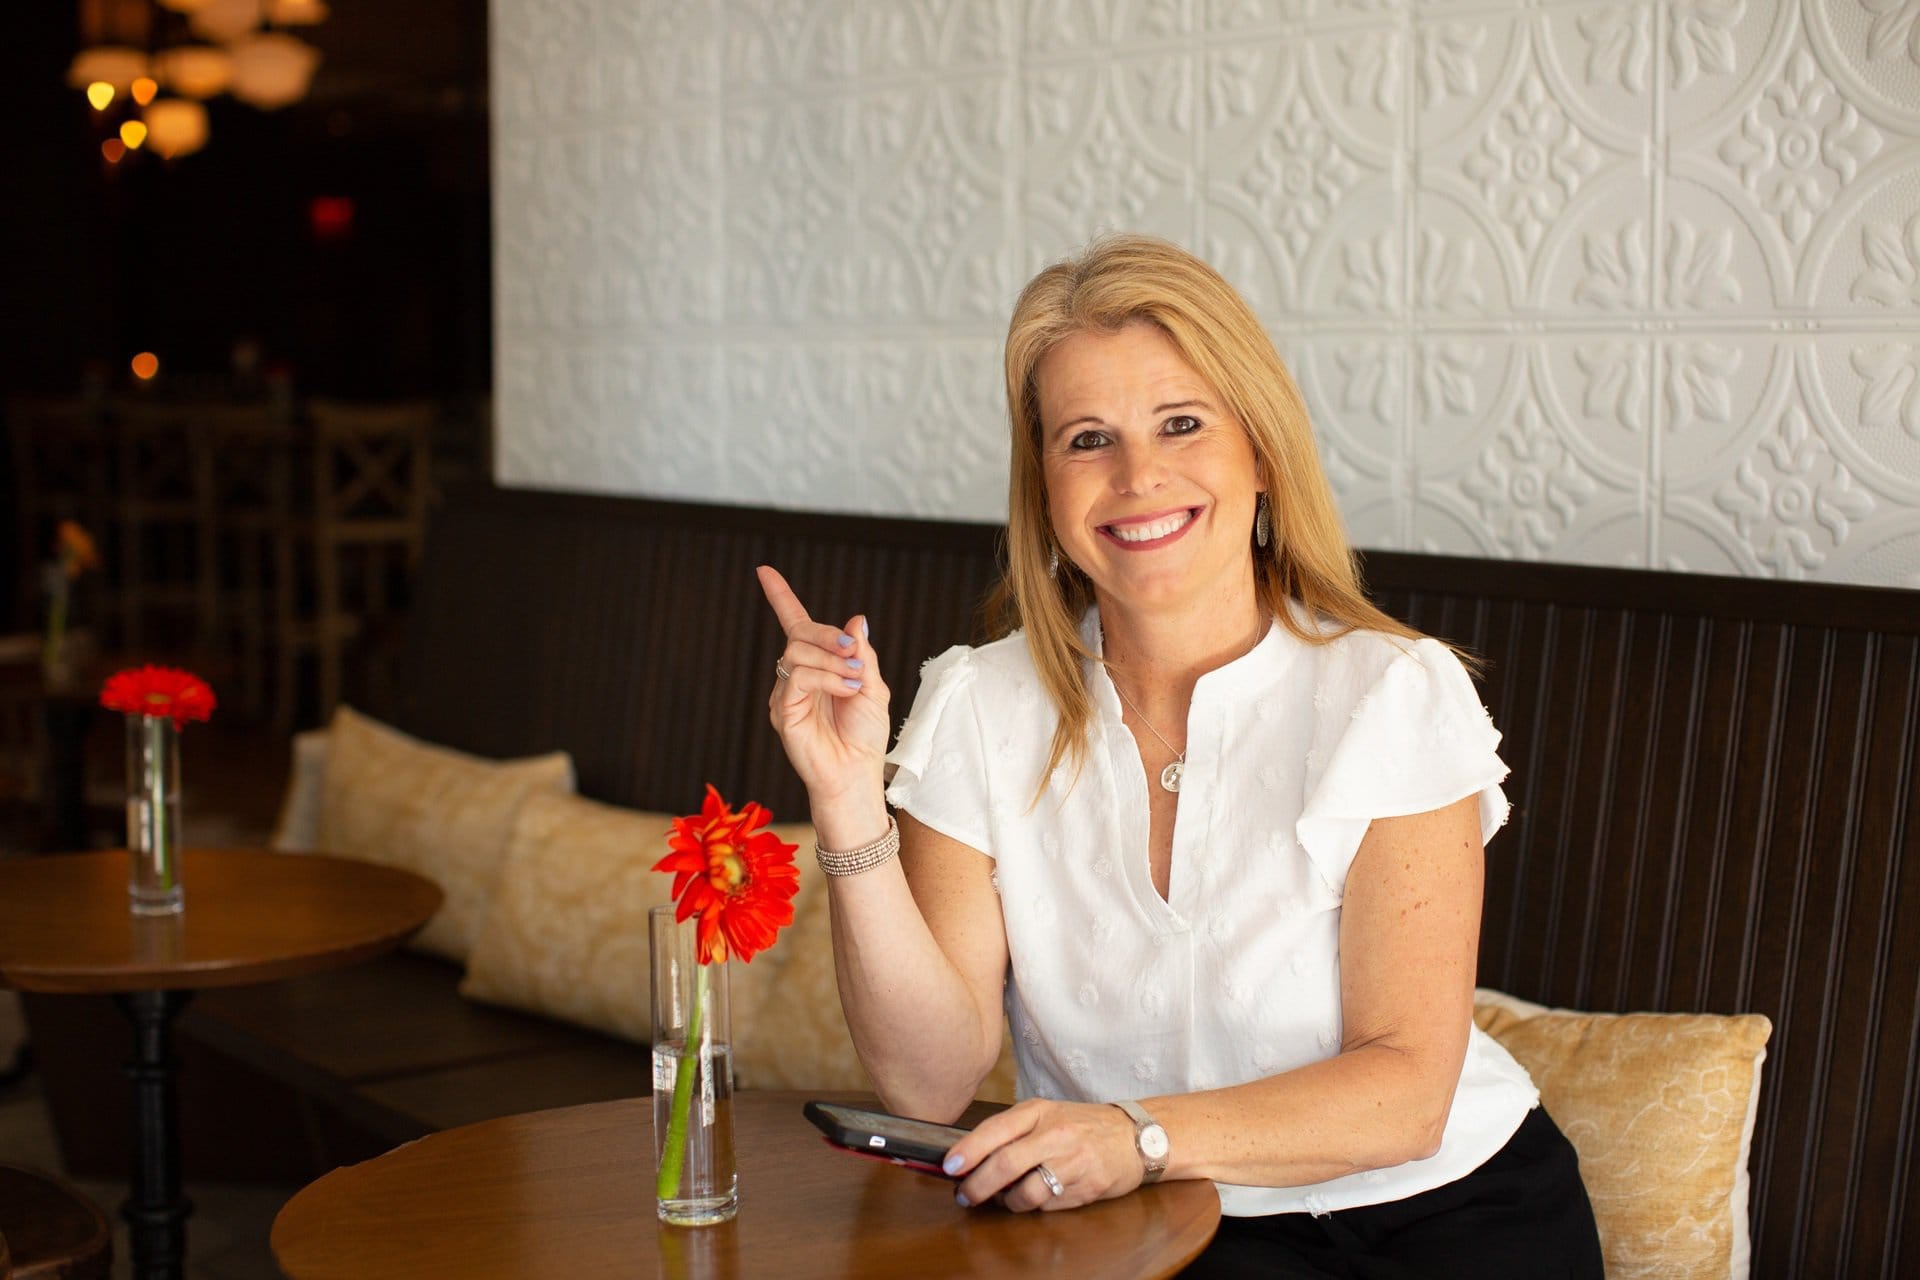 Laura Nelson sitting at a coffee shop table, holding a mobile phone, while smiling and pointing upwards